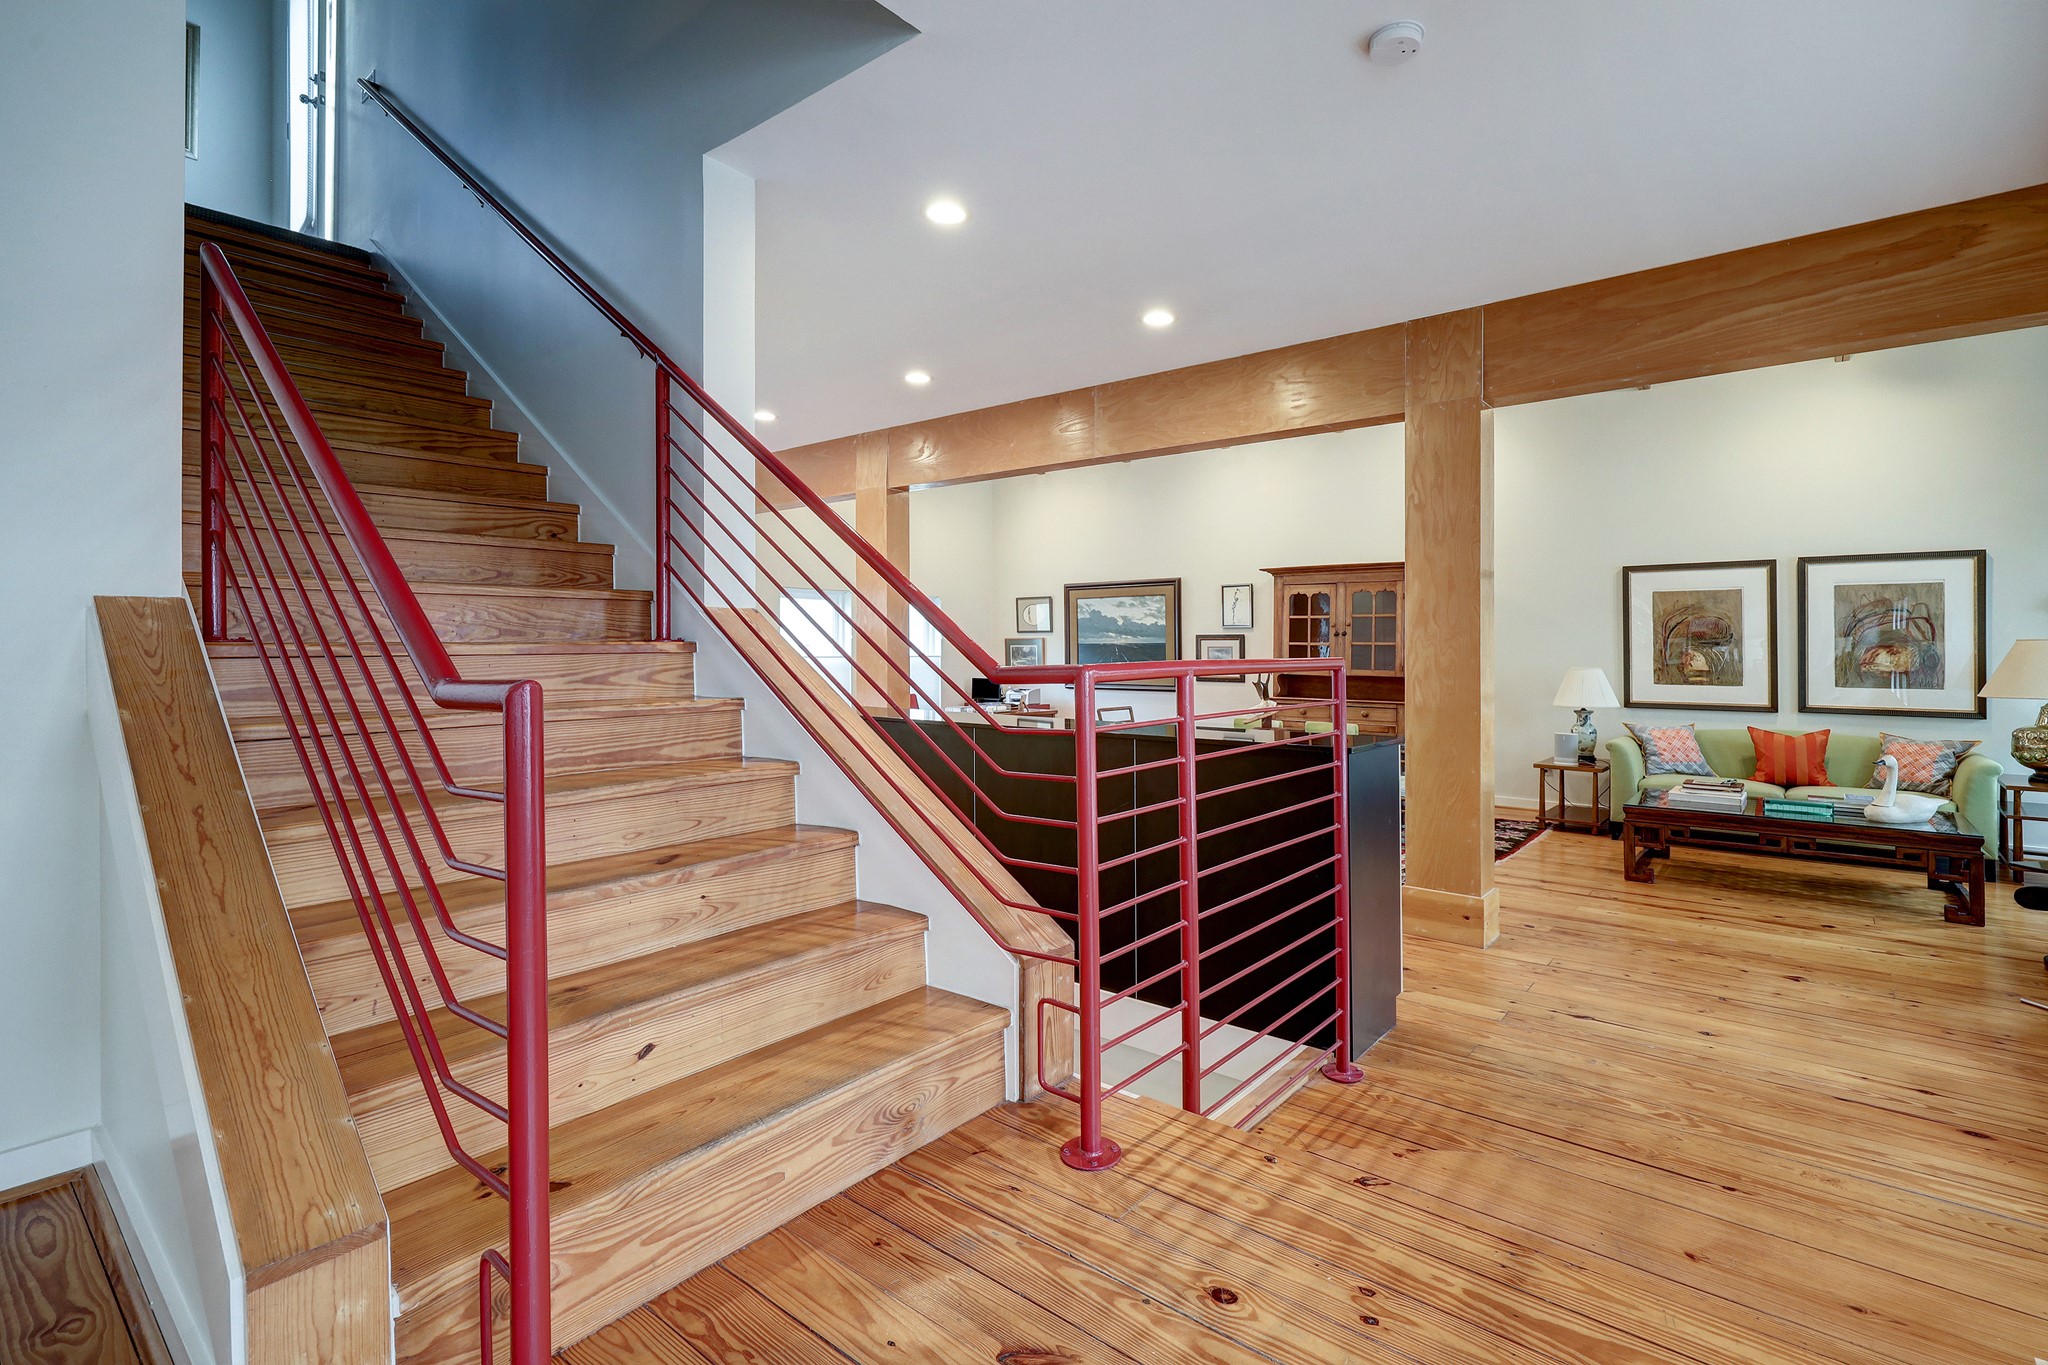 This staircase leads to the serene their floor primary bedroom suite.